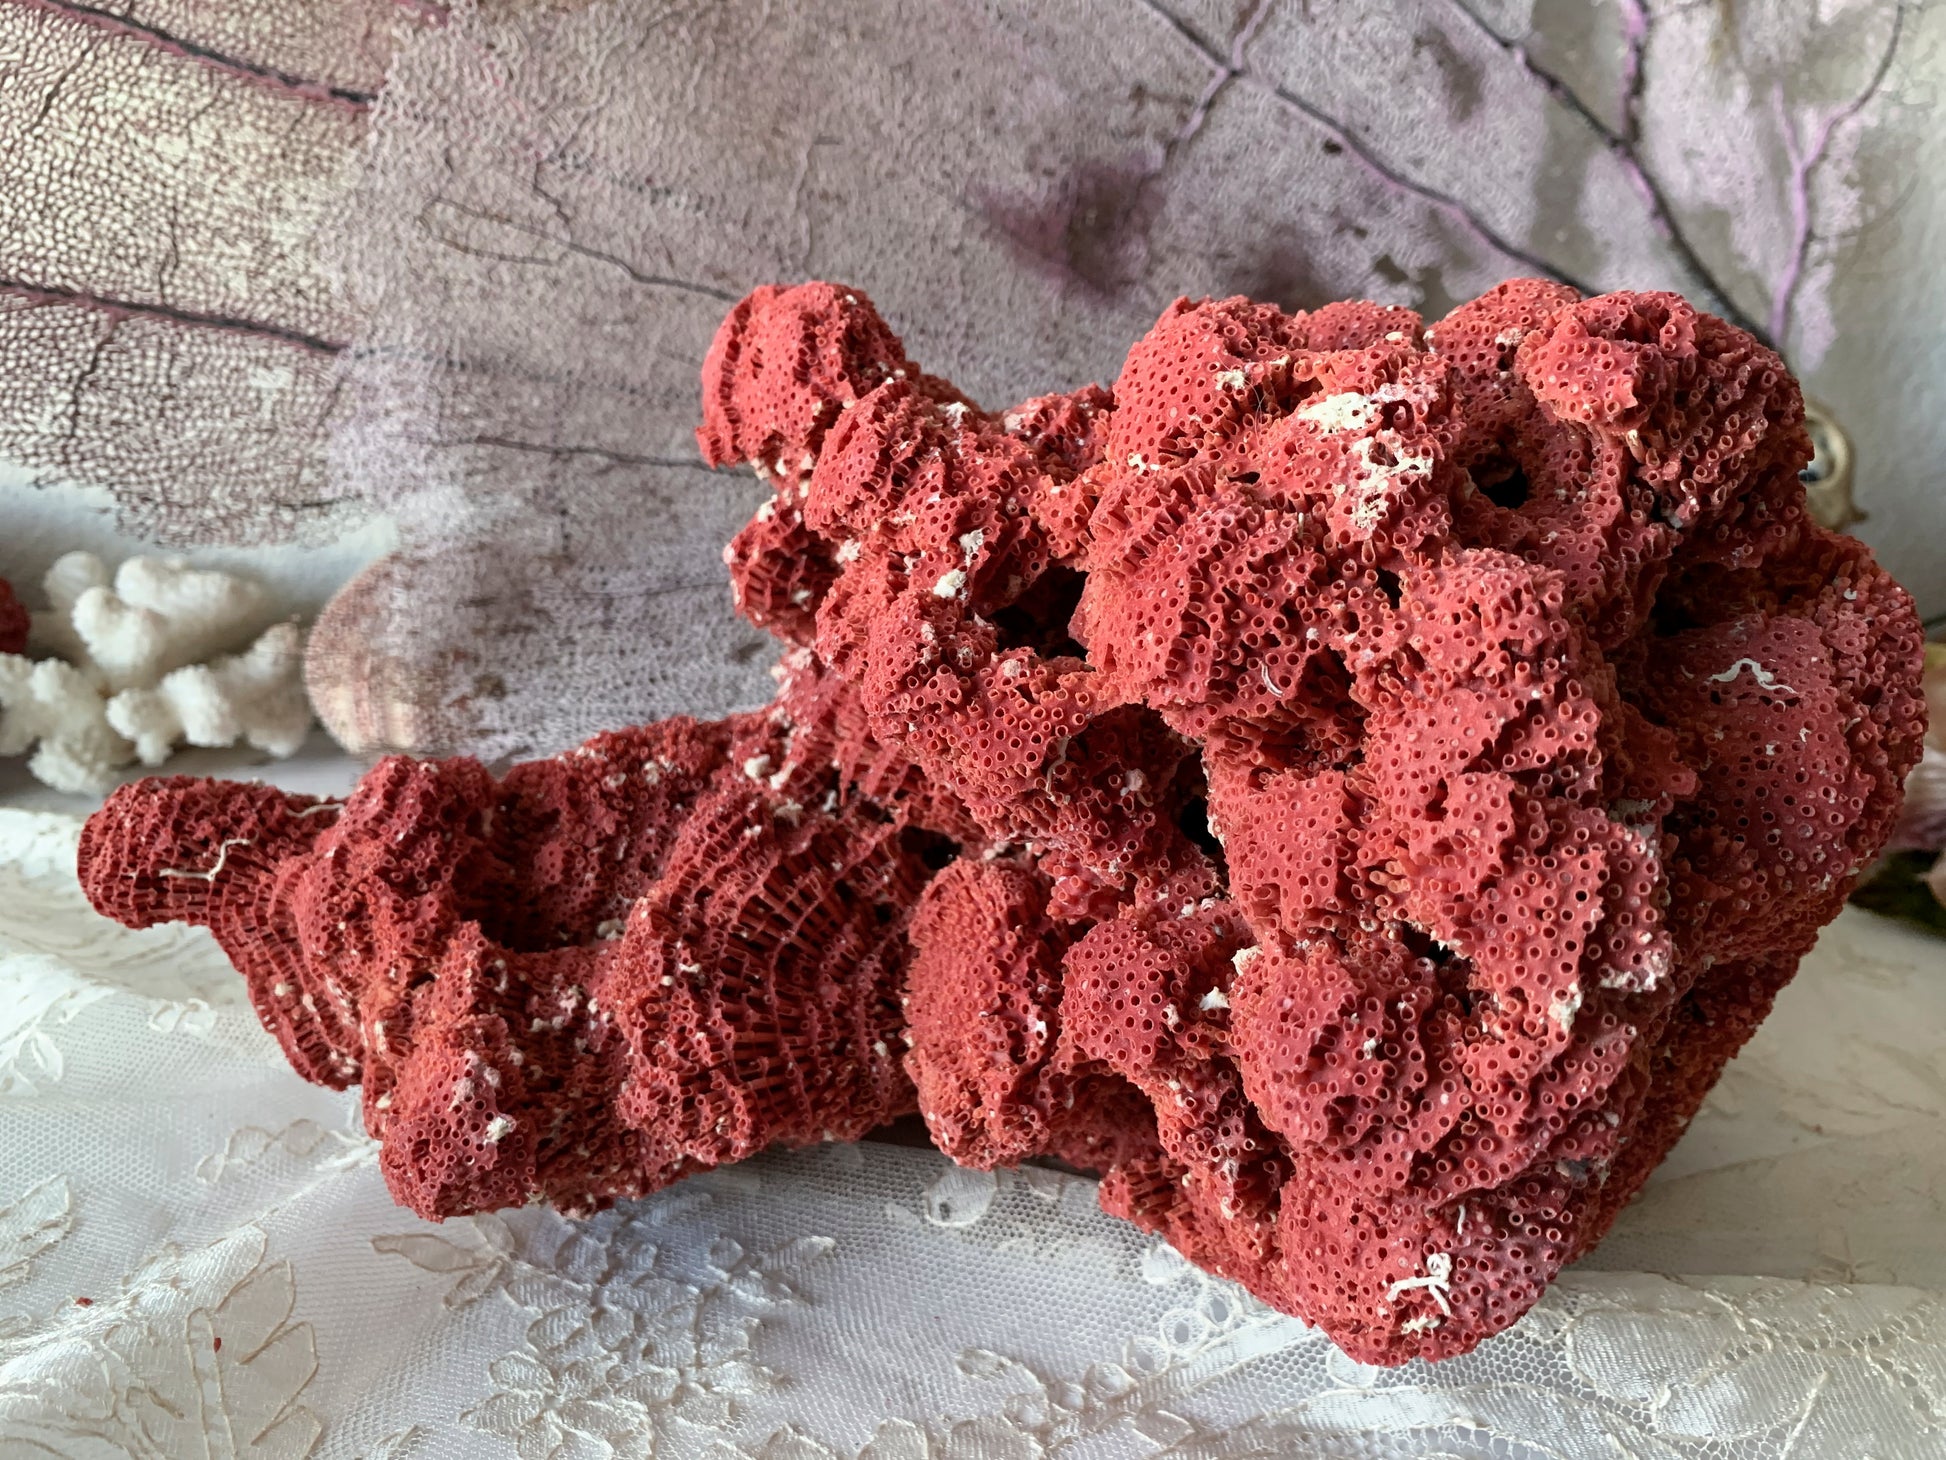 Real coral shell large red pipe seashell nature specimen – SAD ROSETTA